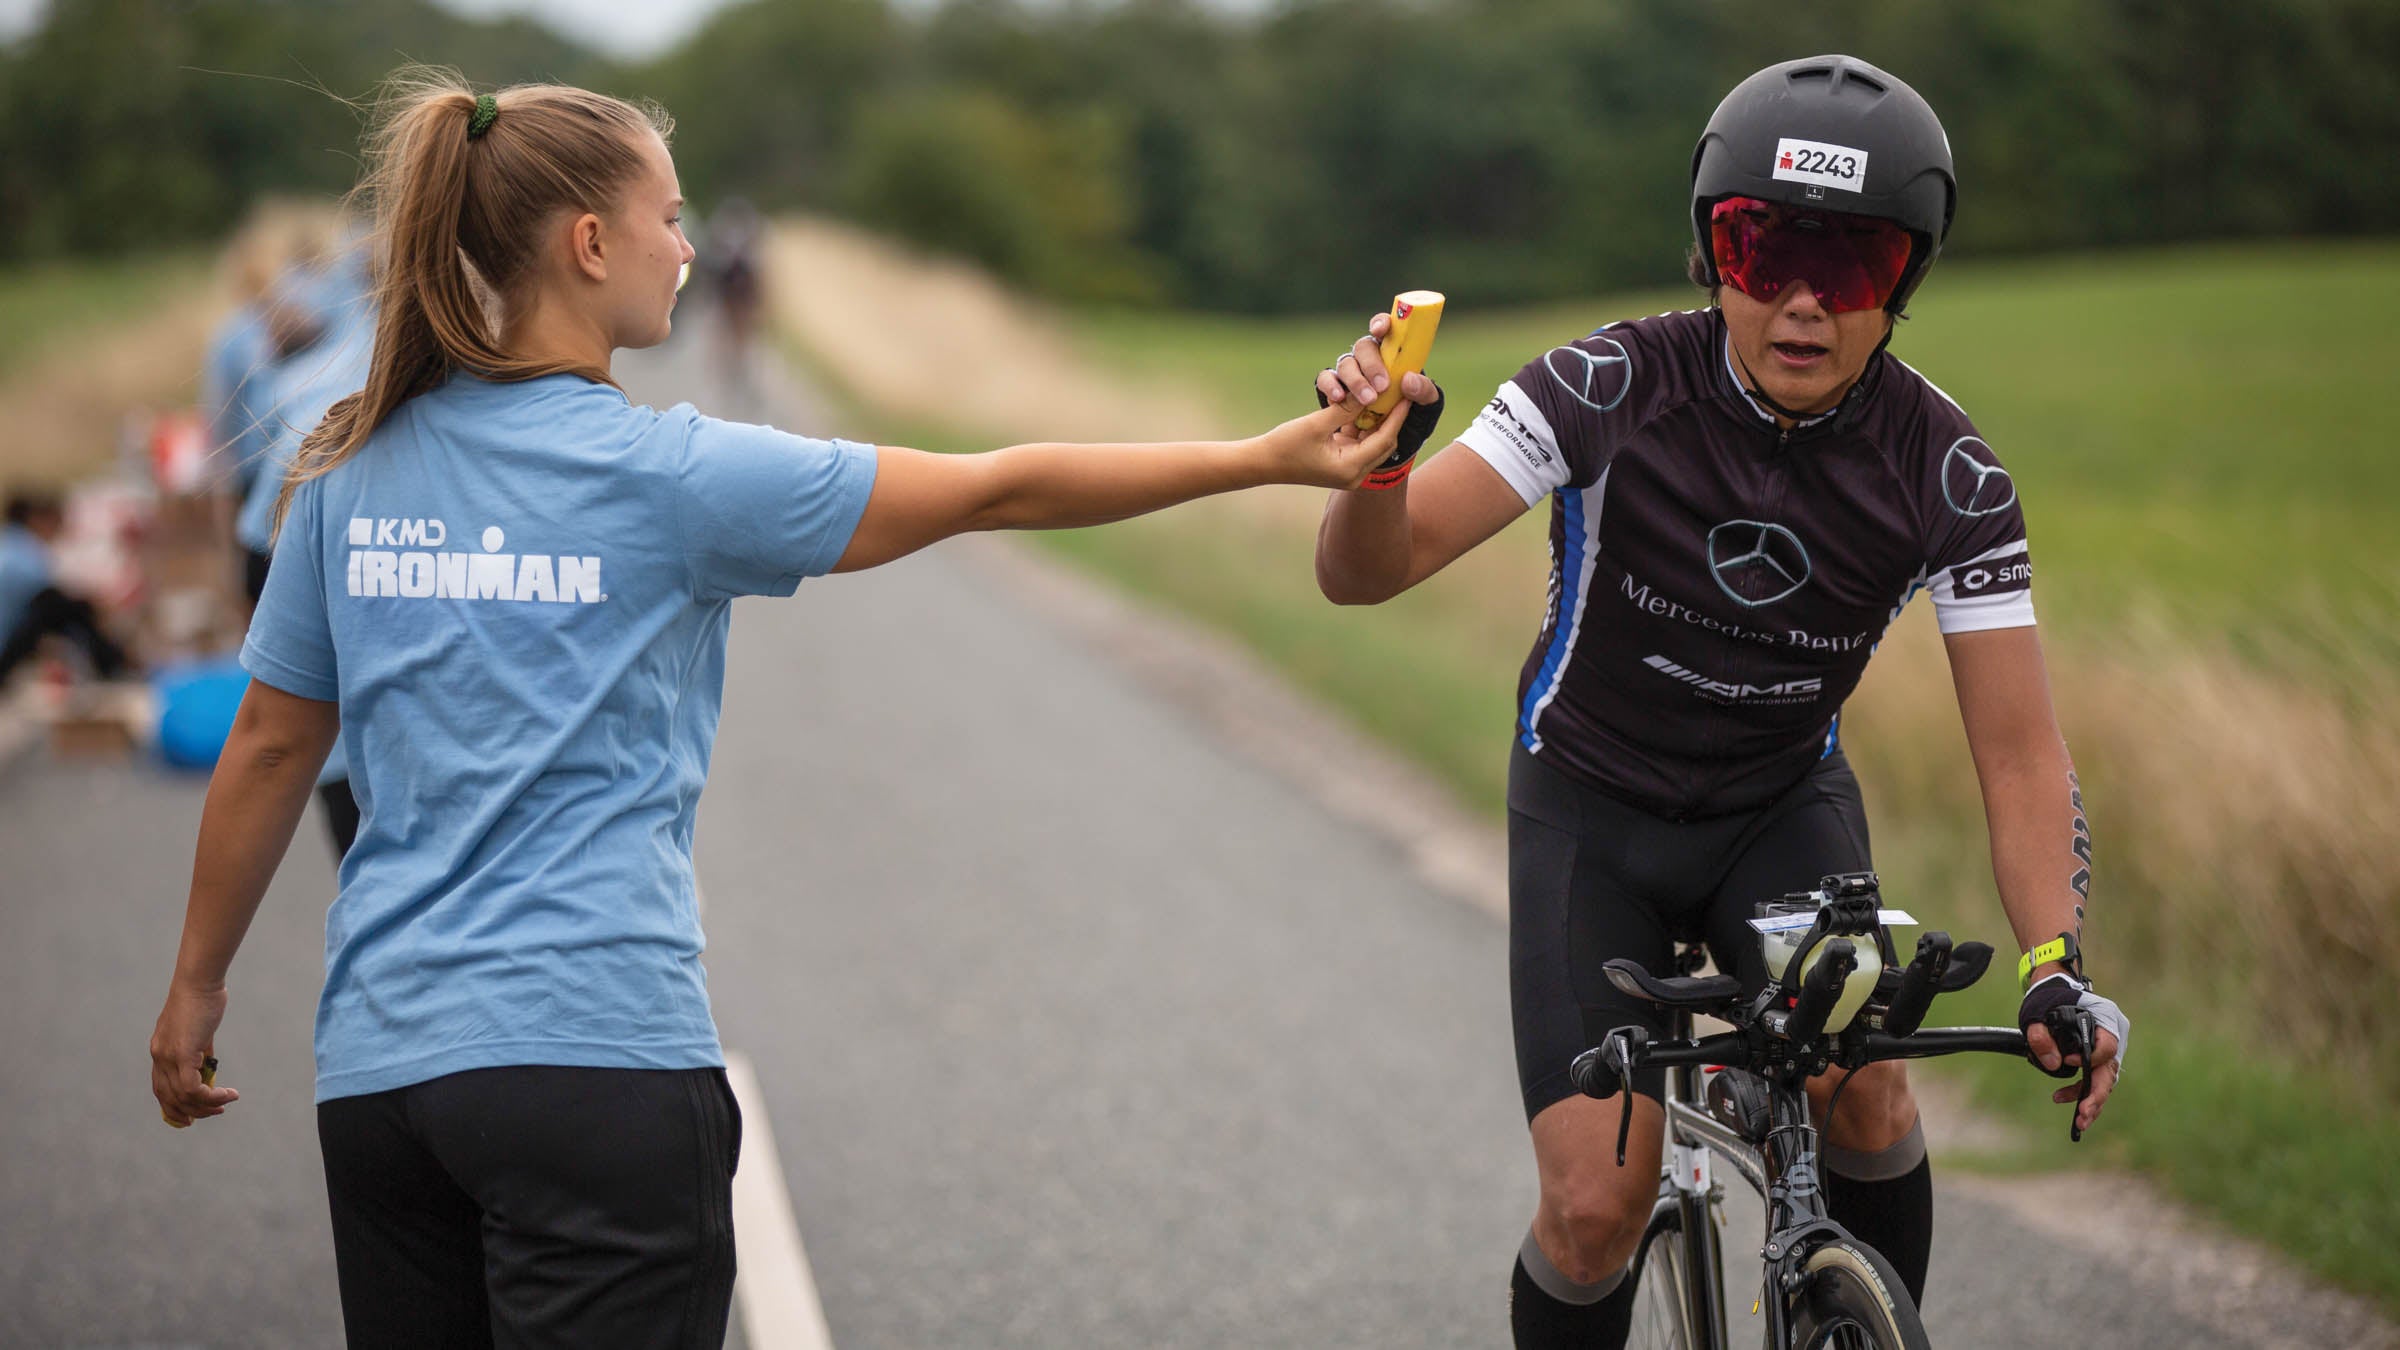 An athlete competes as a volunteer gives her a banana at an aid station